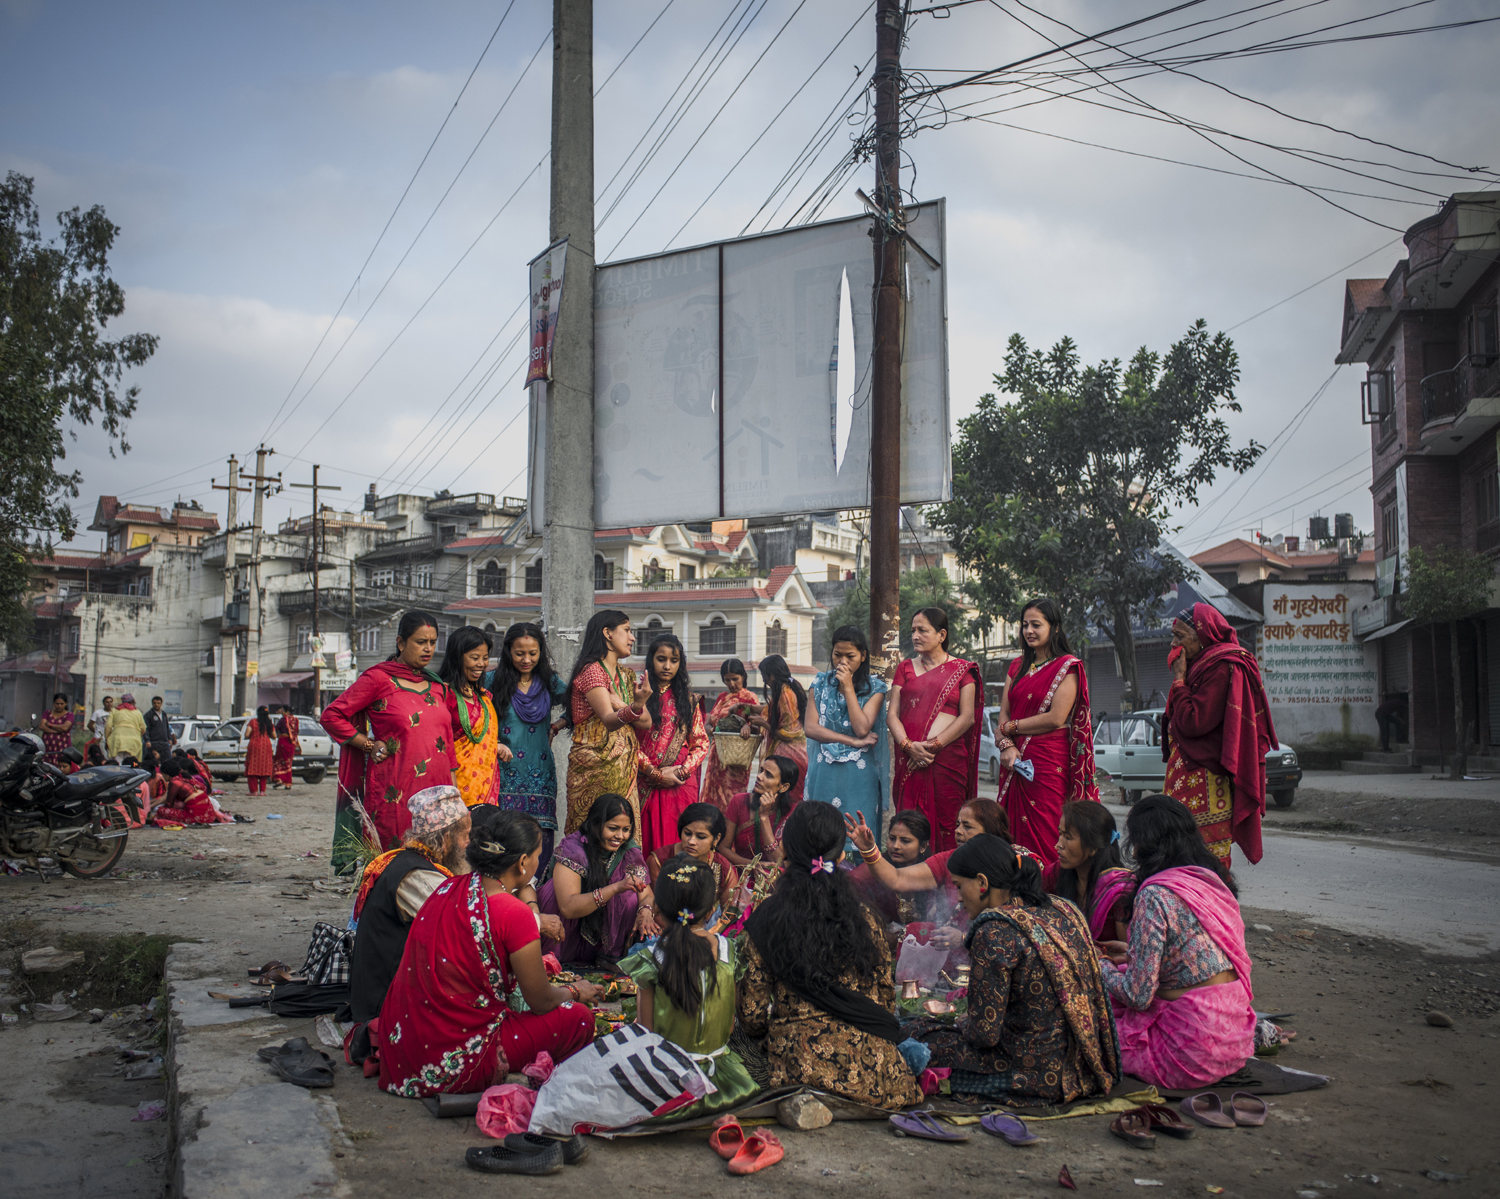 A group of women gather to surrender final prayers during RishiPanchami. Rishi Panchami is a festival that commemorates a woman who was reborn as a prostitute because she didn’t follow menstrual restrictions. It is a women’s holiday, and so Nepal’s government gives all women a day off work to perform rituals where they wash themselves to atone for any sins they may have committed while menstruating in the previous year.